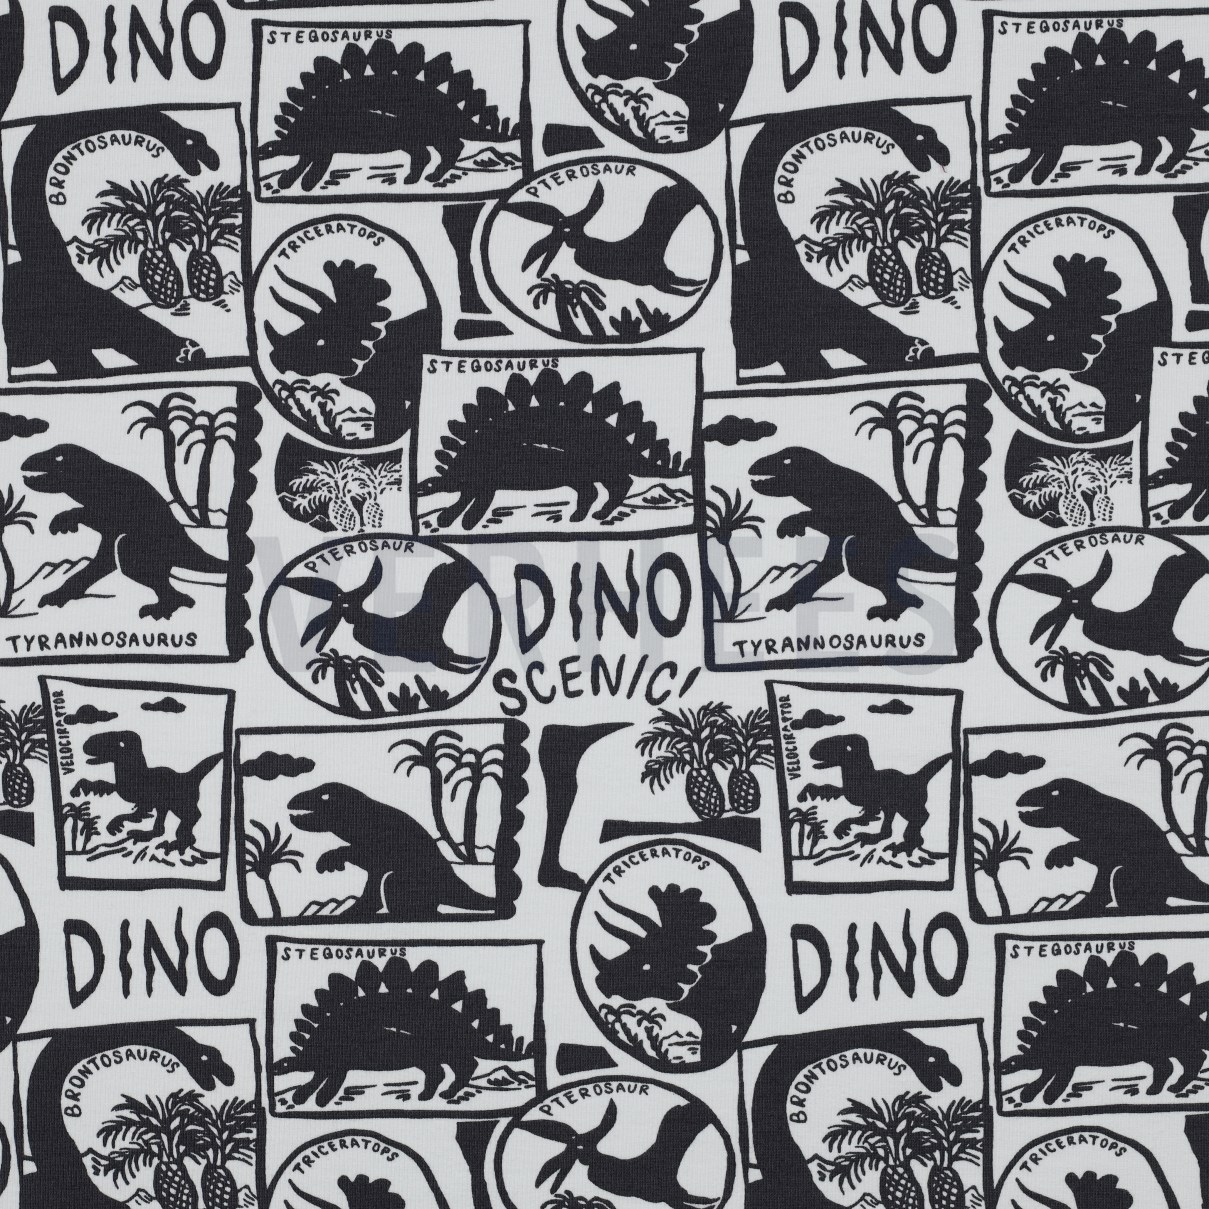 JERSEY DINO SCENIC ANTHRACITE (high resolution)